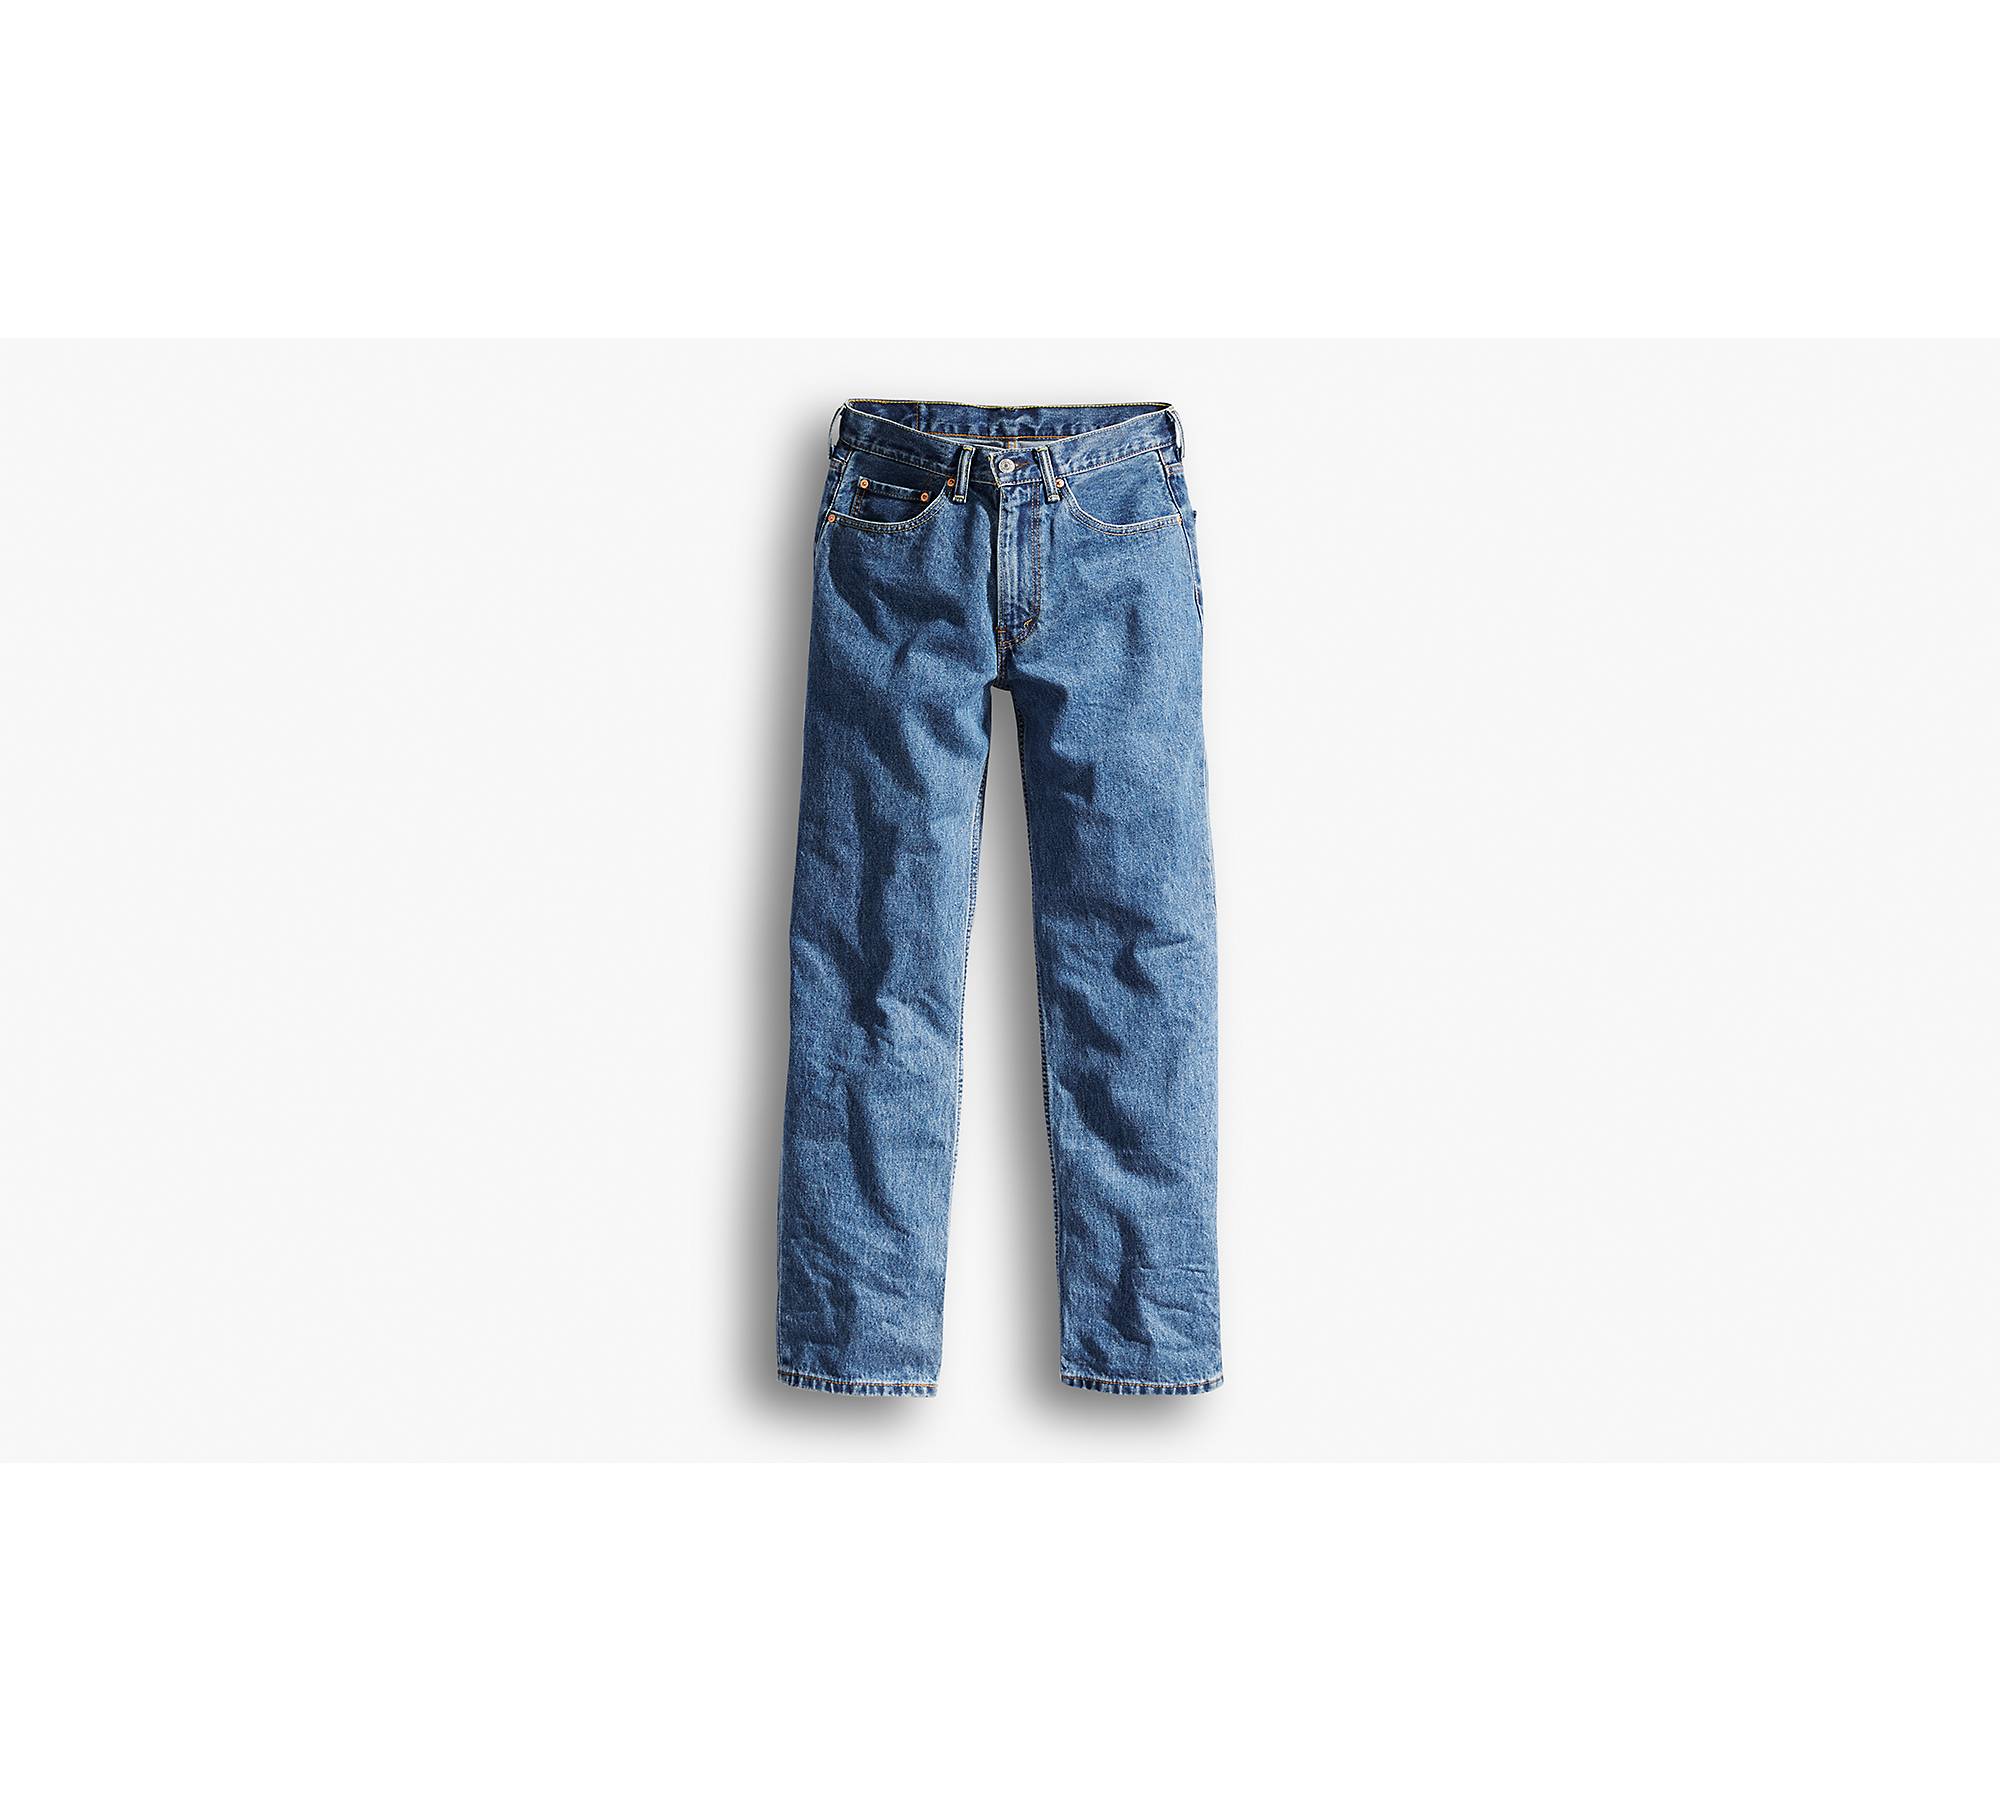 550™ Relaxed Fit Men's Jeans (big & Tall) - Medium Wash